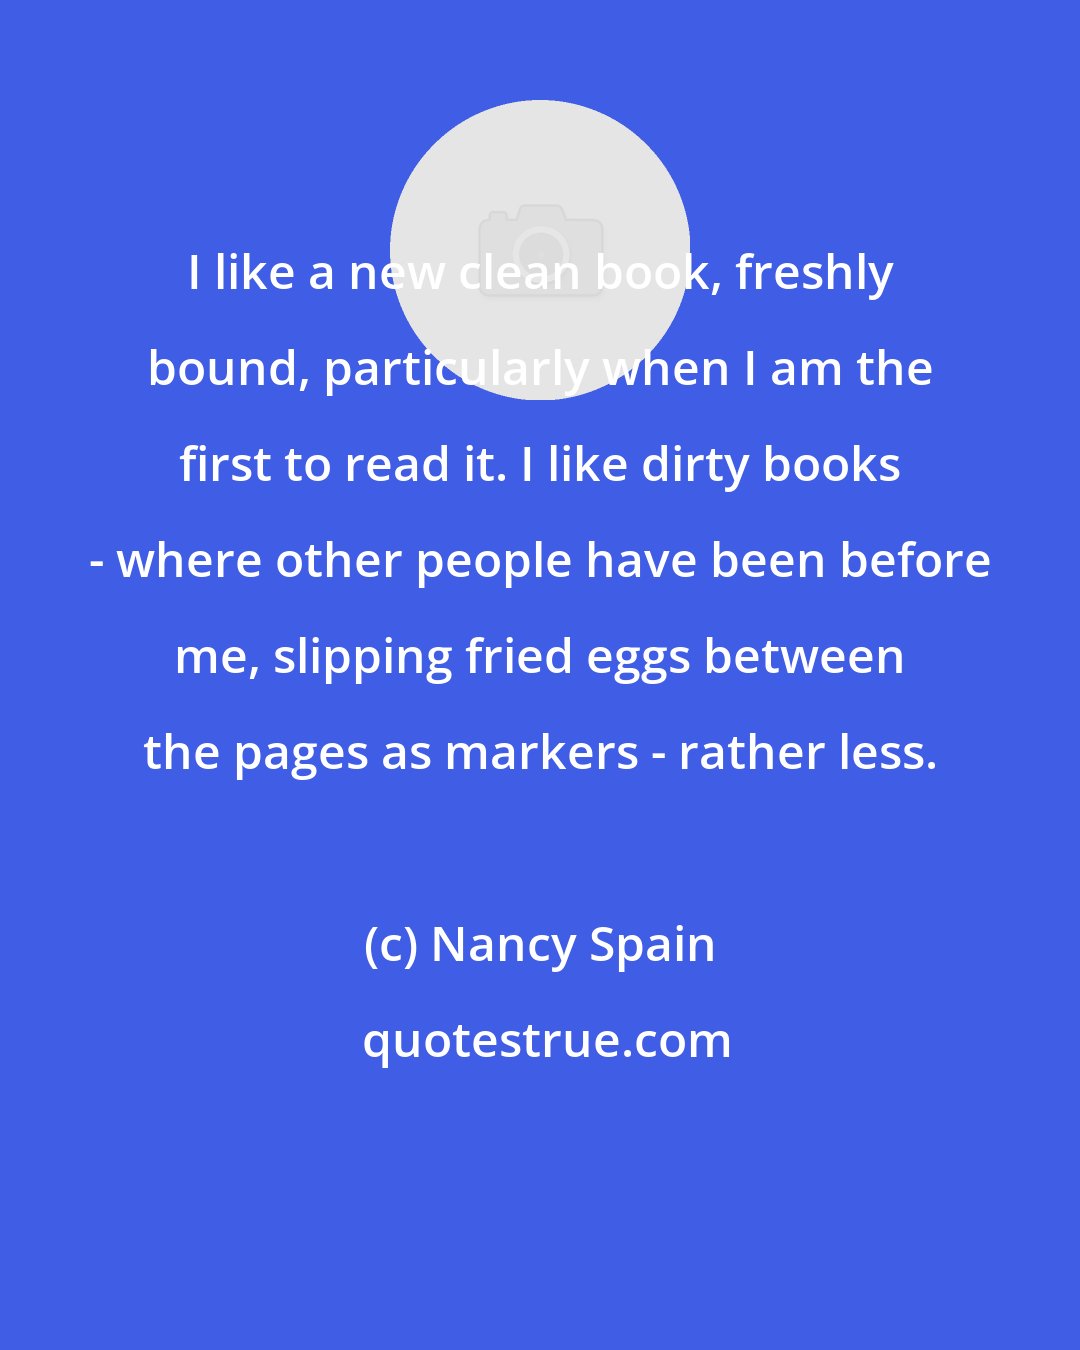 Nancy Spain: I like a new clean book, freshly bound, particularly when I am the first to read it. I like dirty books - where other people have been before me, slipping fried eggs between the pages as markers - rather less.